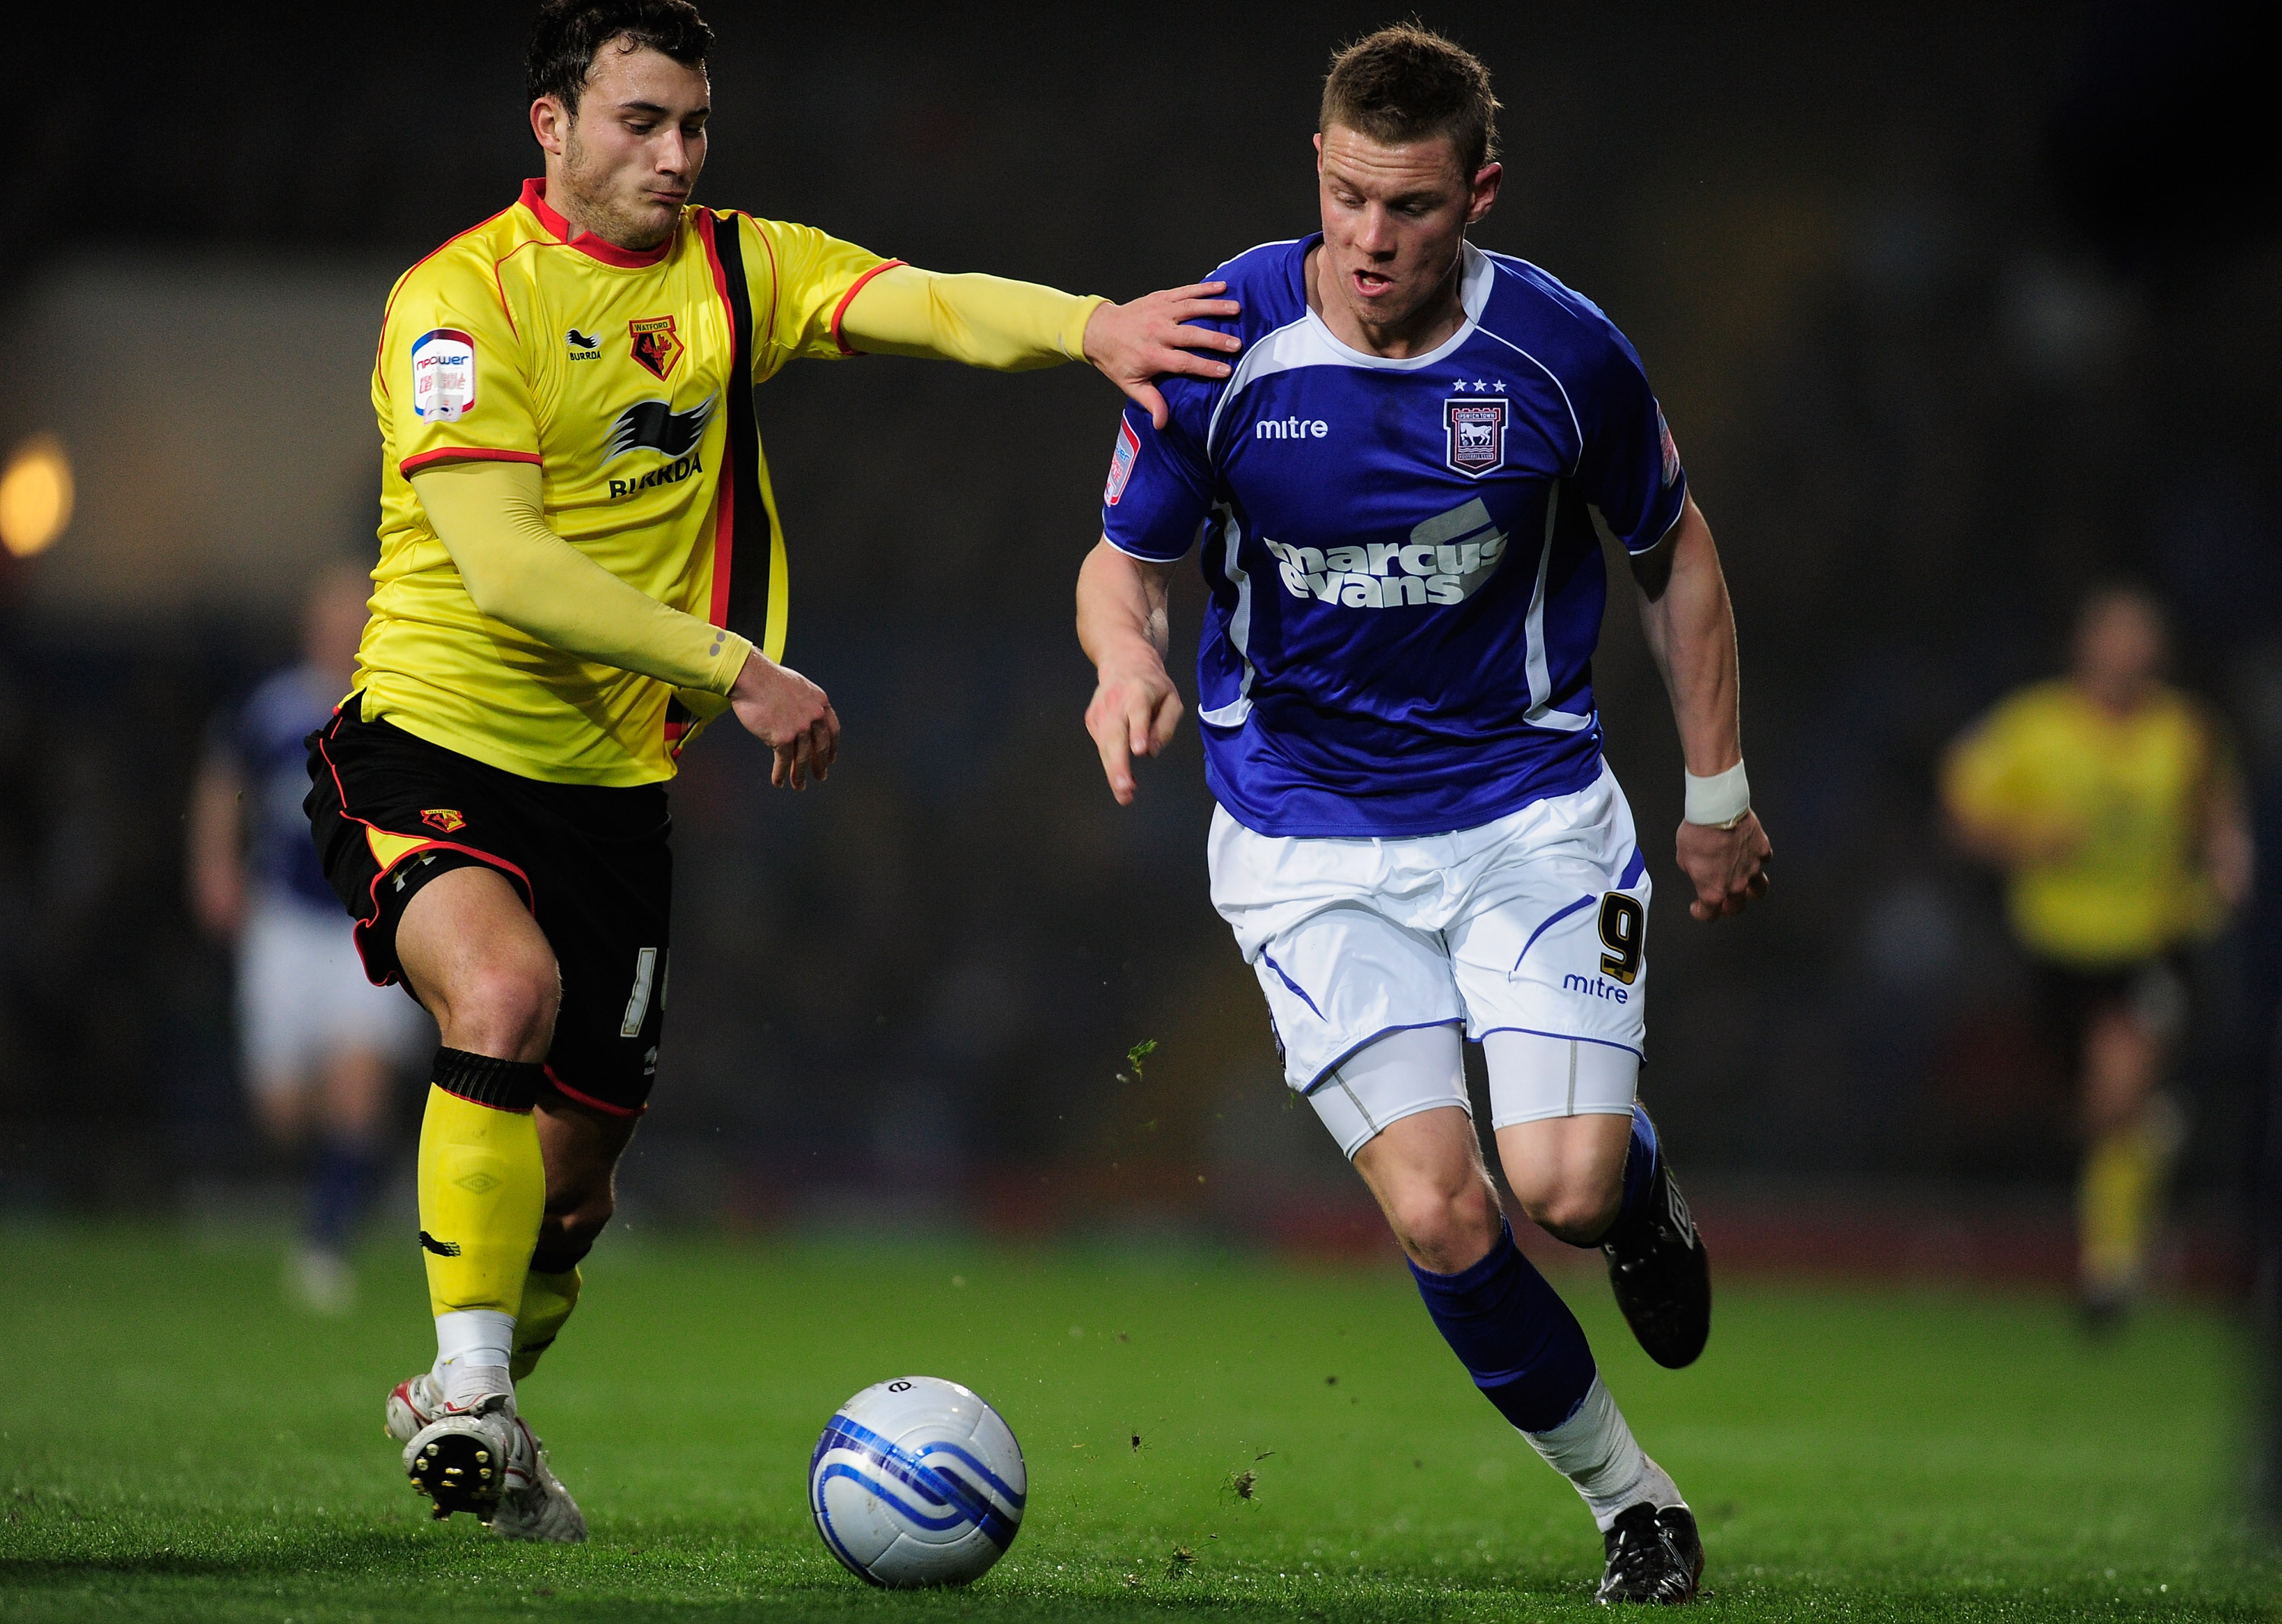 IPSWICH, ENGLAND - MARCH 15:  Connor Wickham of Ipswich Town battles with Will Buckley of Watford during the npower Championship match between Ipswich Town and Watford at Portman Road on March 15, 2011 in Ipswich, England.  (Photo by Jamie McDonald/Getty